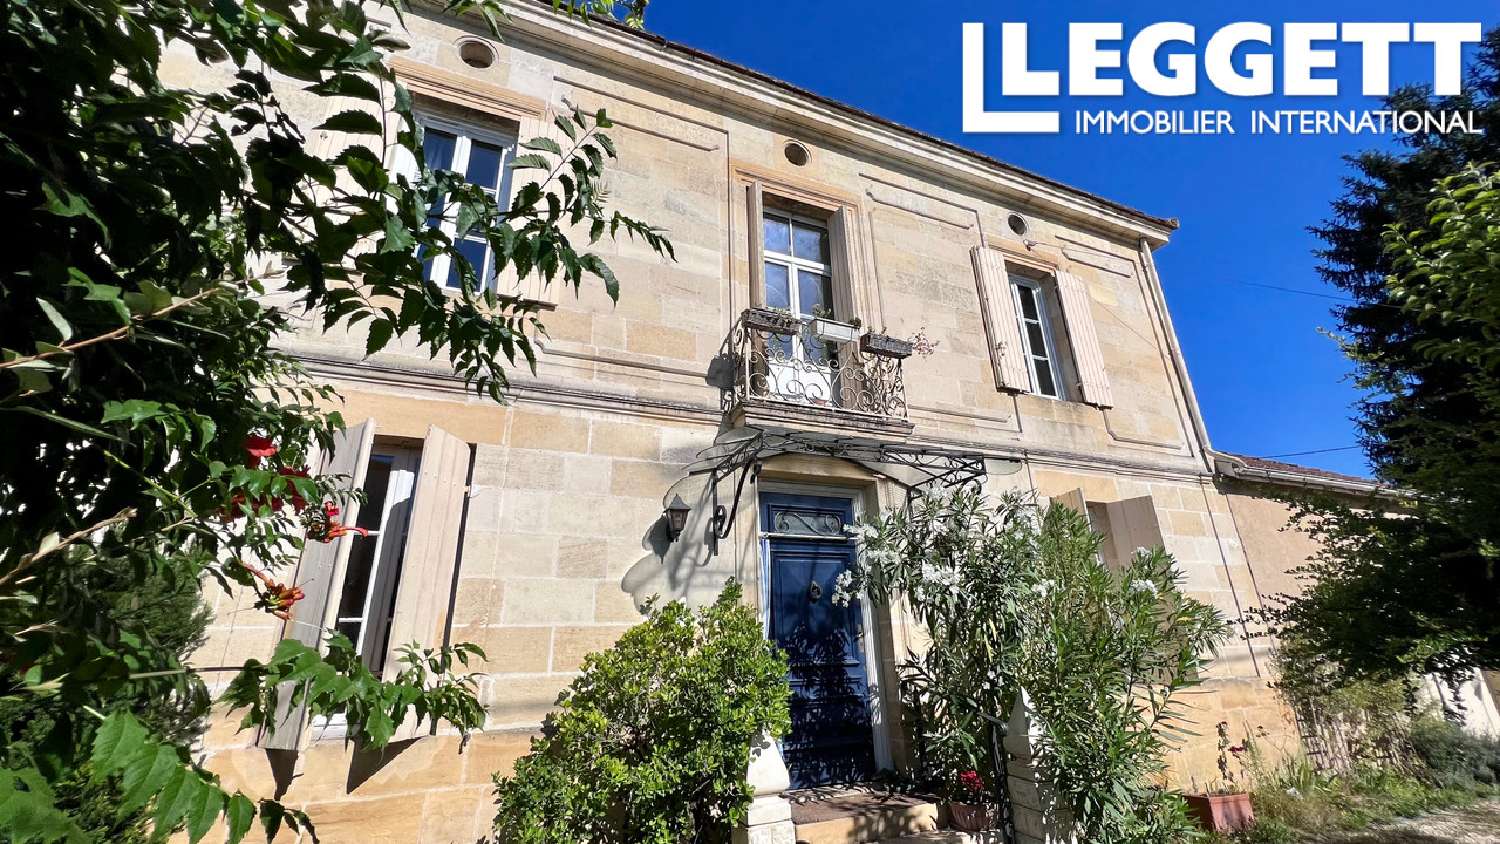  à vendre maison bourgeoise Pineuilh Gironde 1